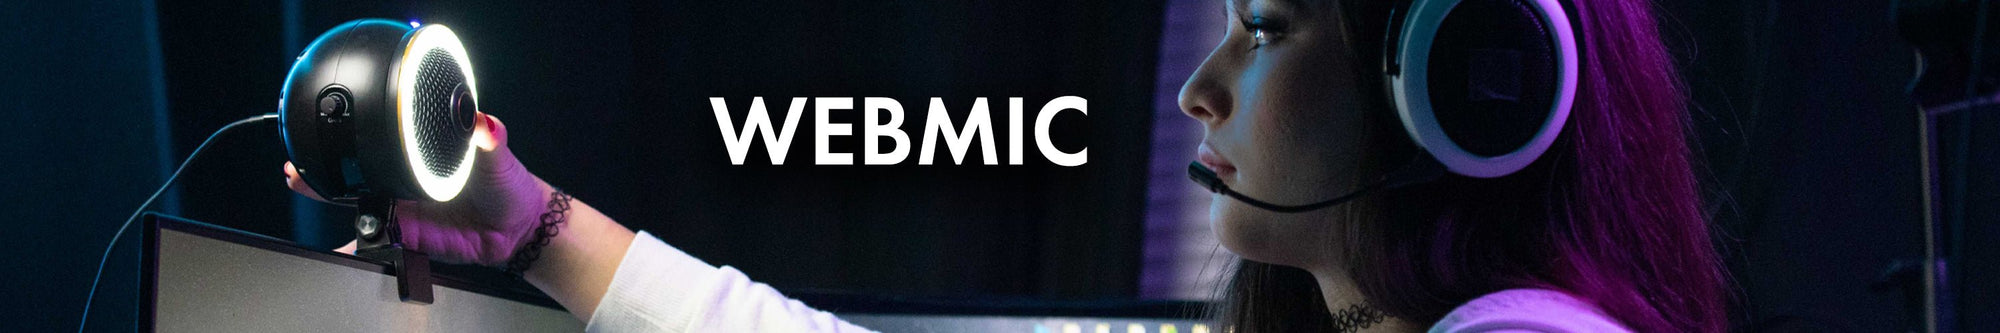 WebMic: Web Cams with Microphone